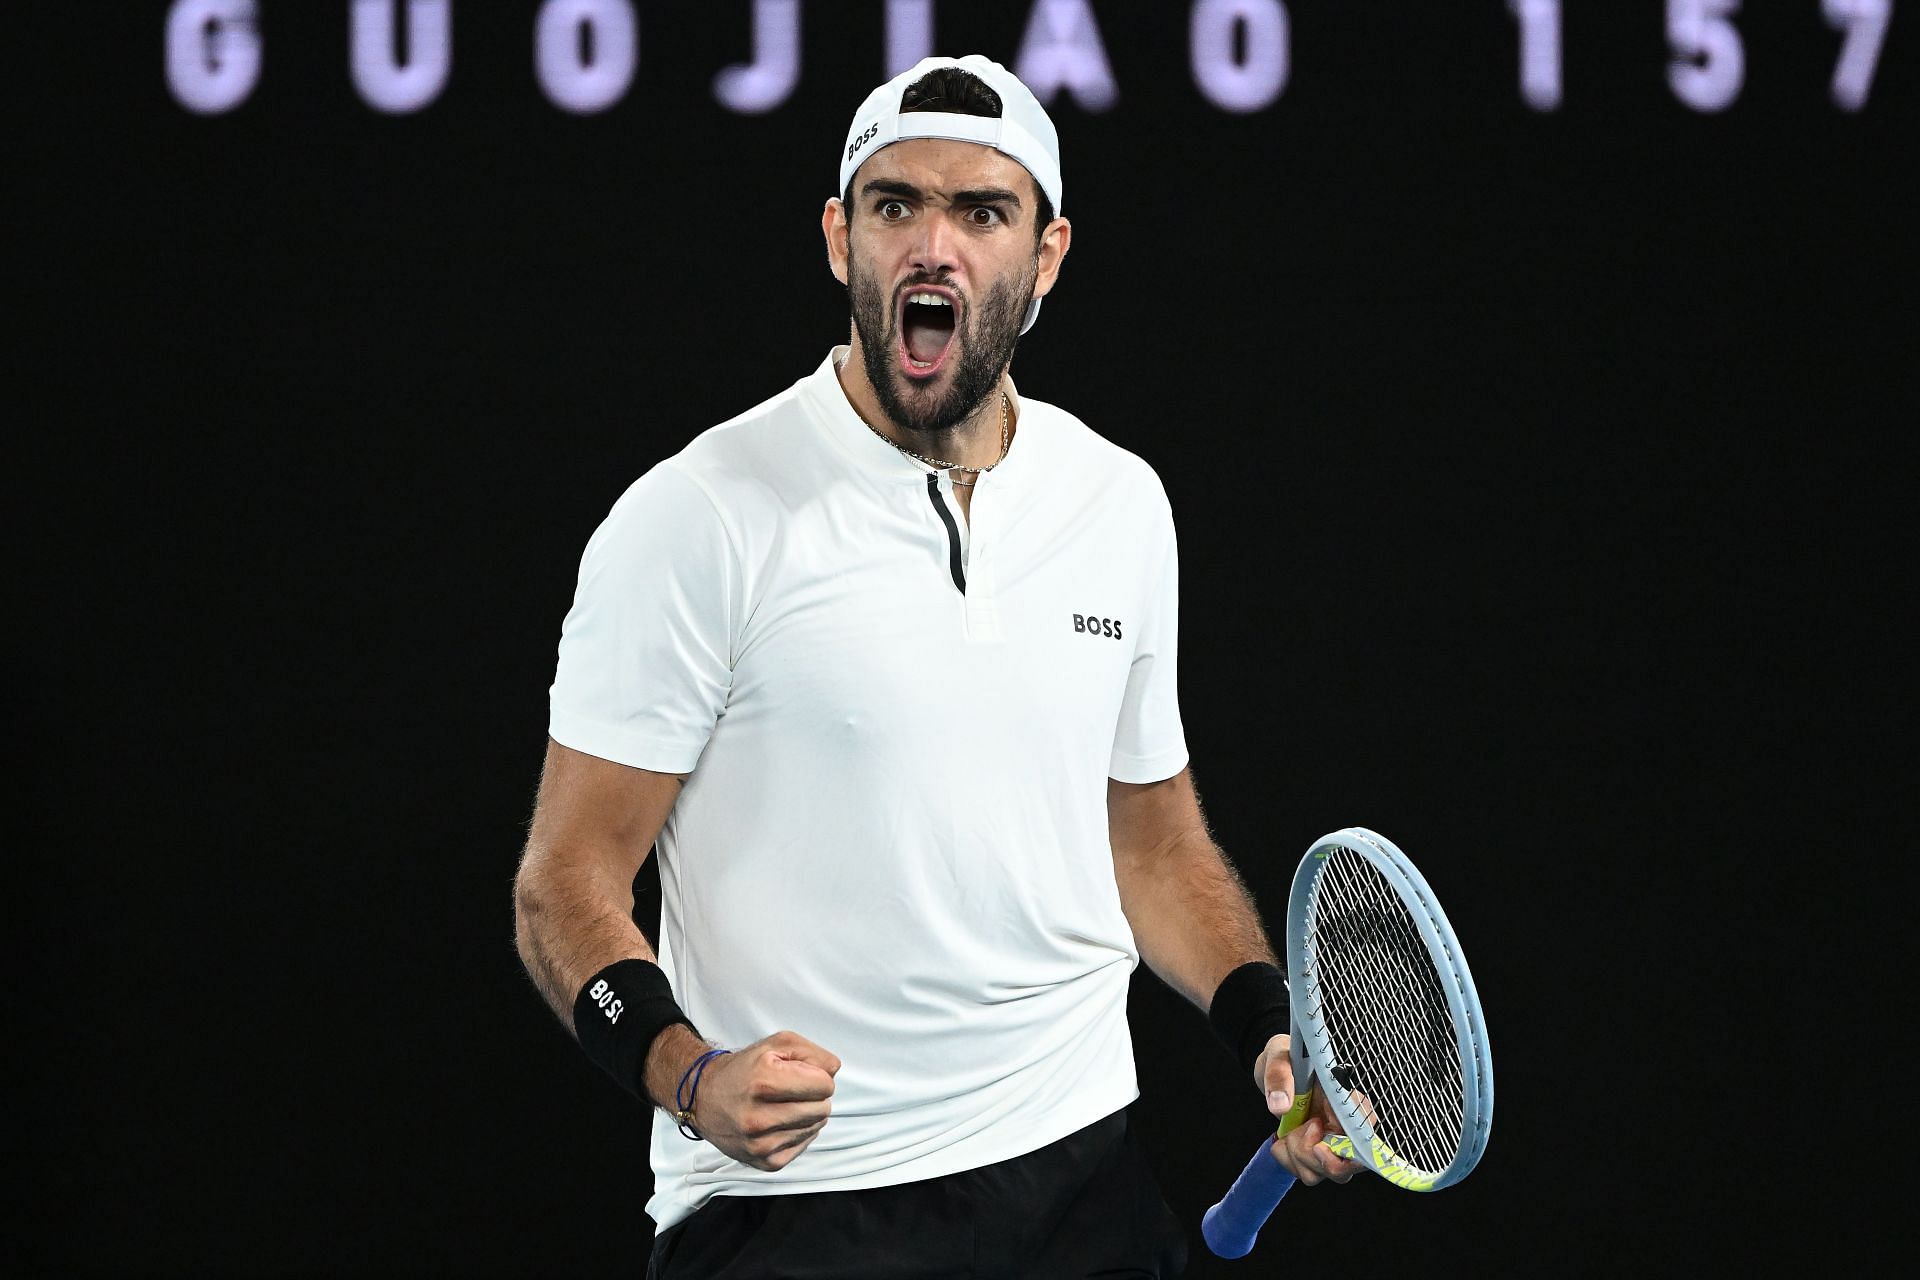 Berrettini is the sixth seed at the Indian Wells Masters